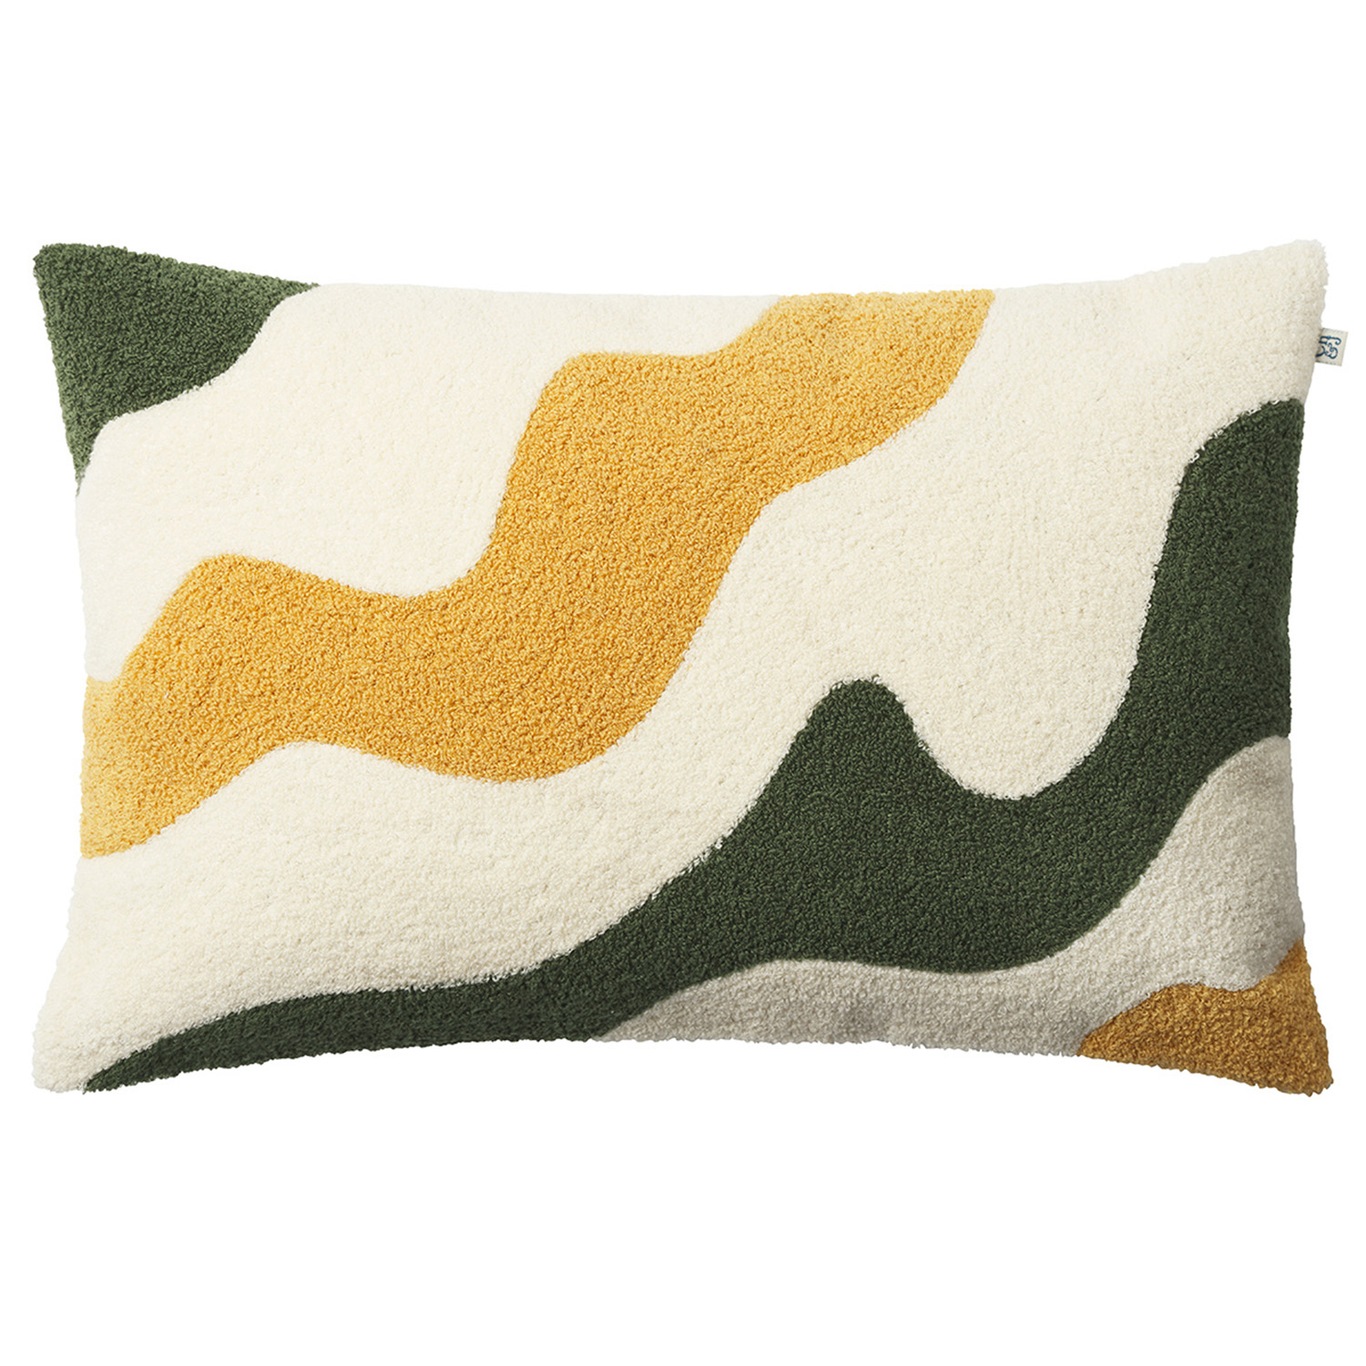 Lodi Cushion Cover Cactus Green / Spicy Yellow / Off-White, 40x60 cm